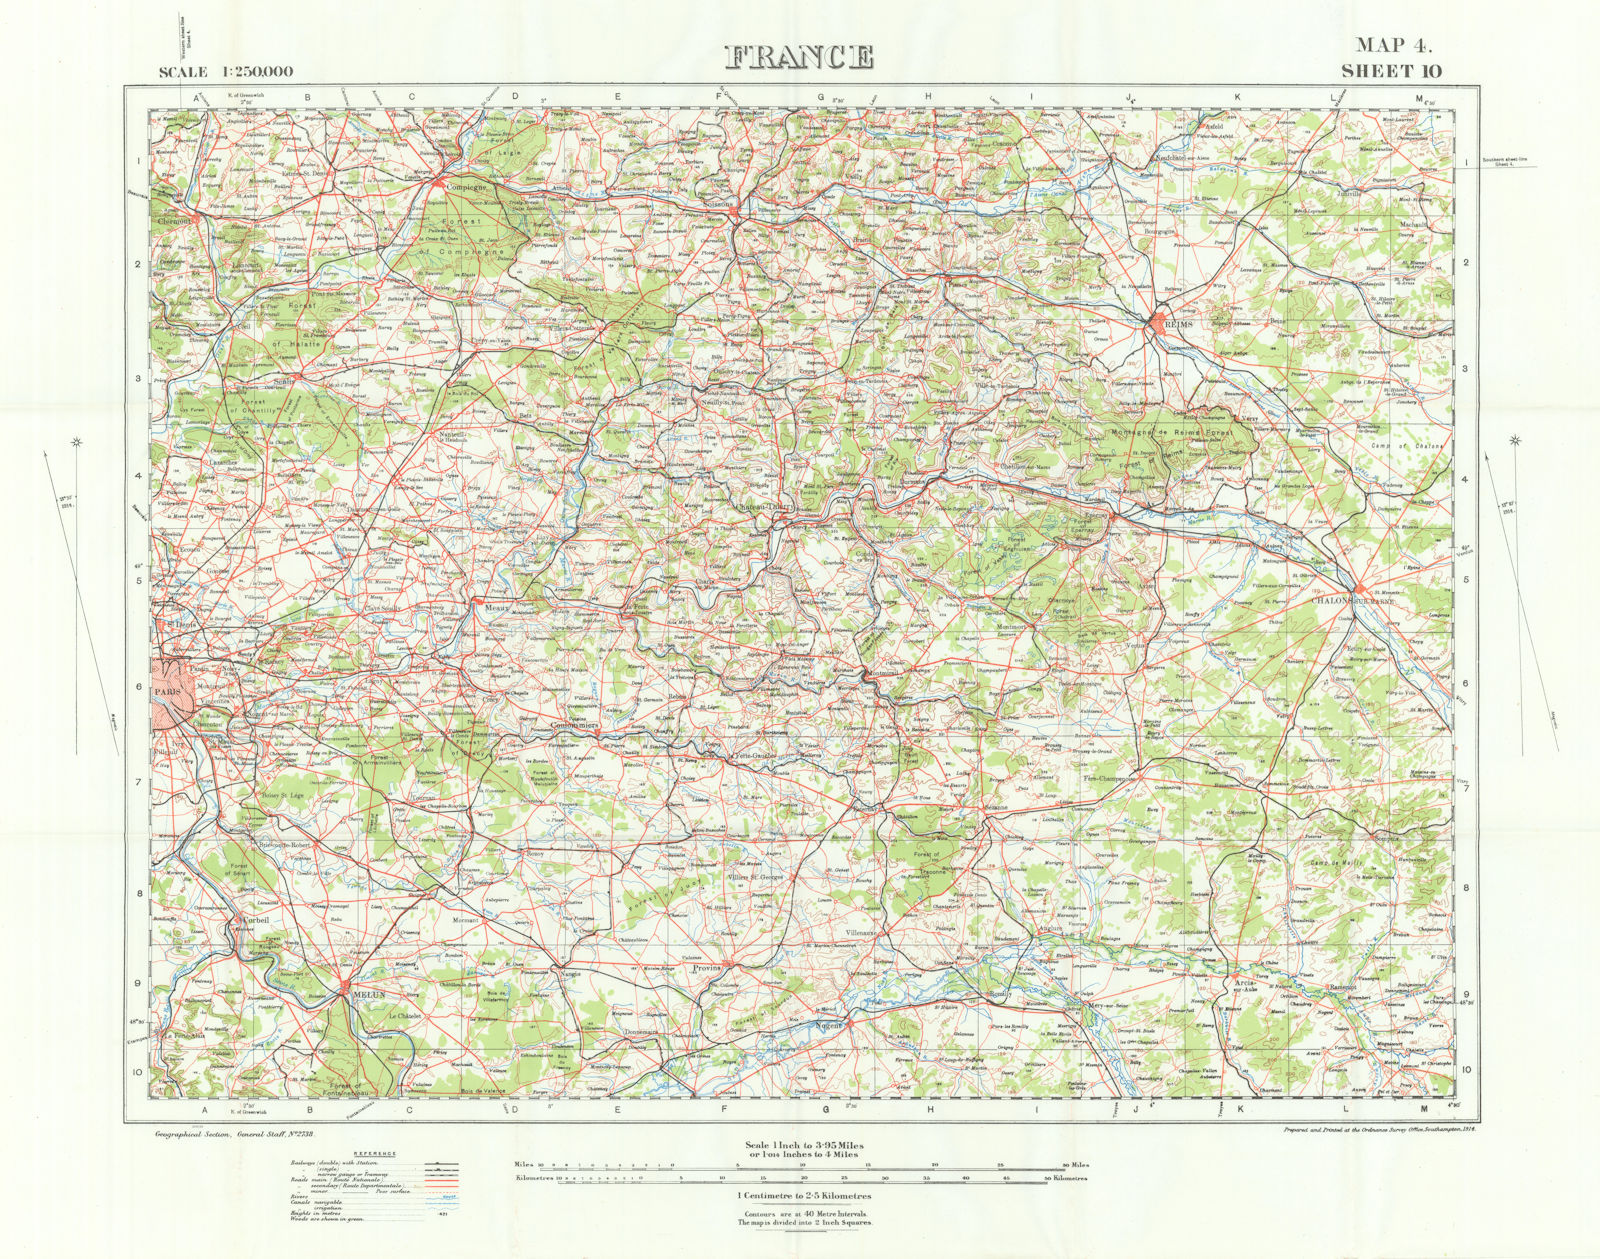 Associate Product France 1914. First World War. 1933 old vintage map plan chart